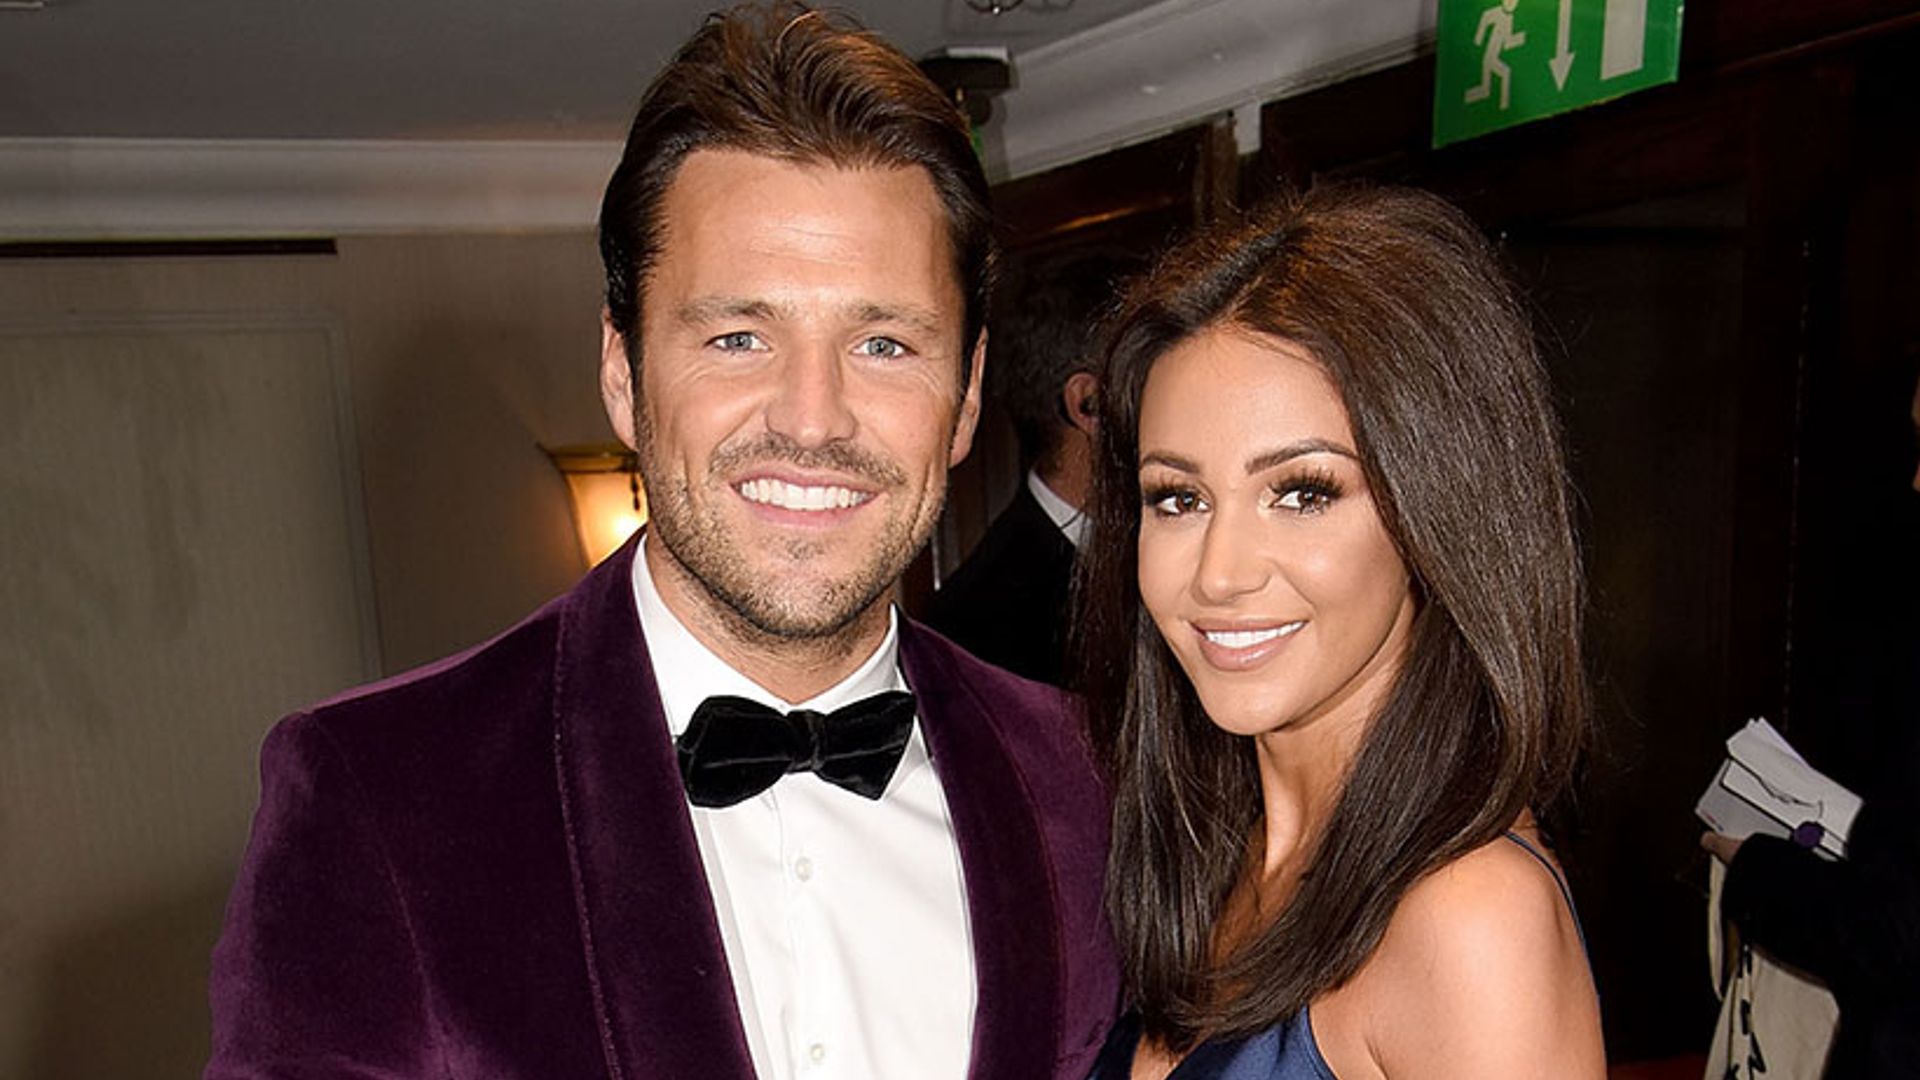 Michelle Keegan looks happy to be home after eight months filming